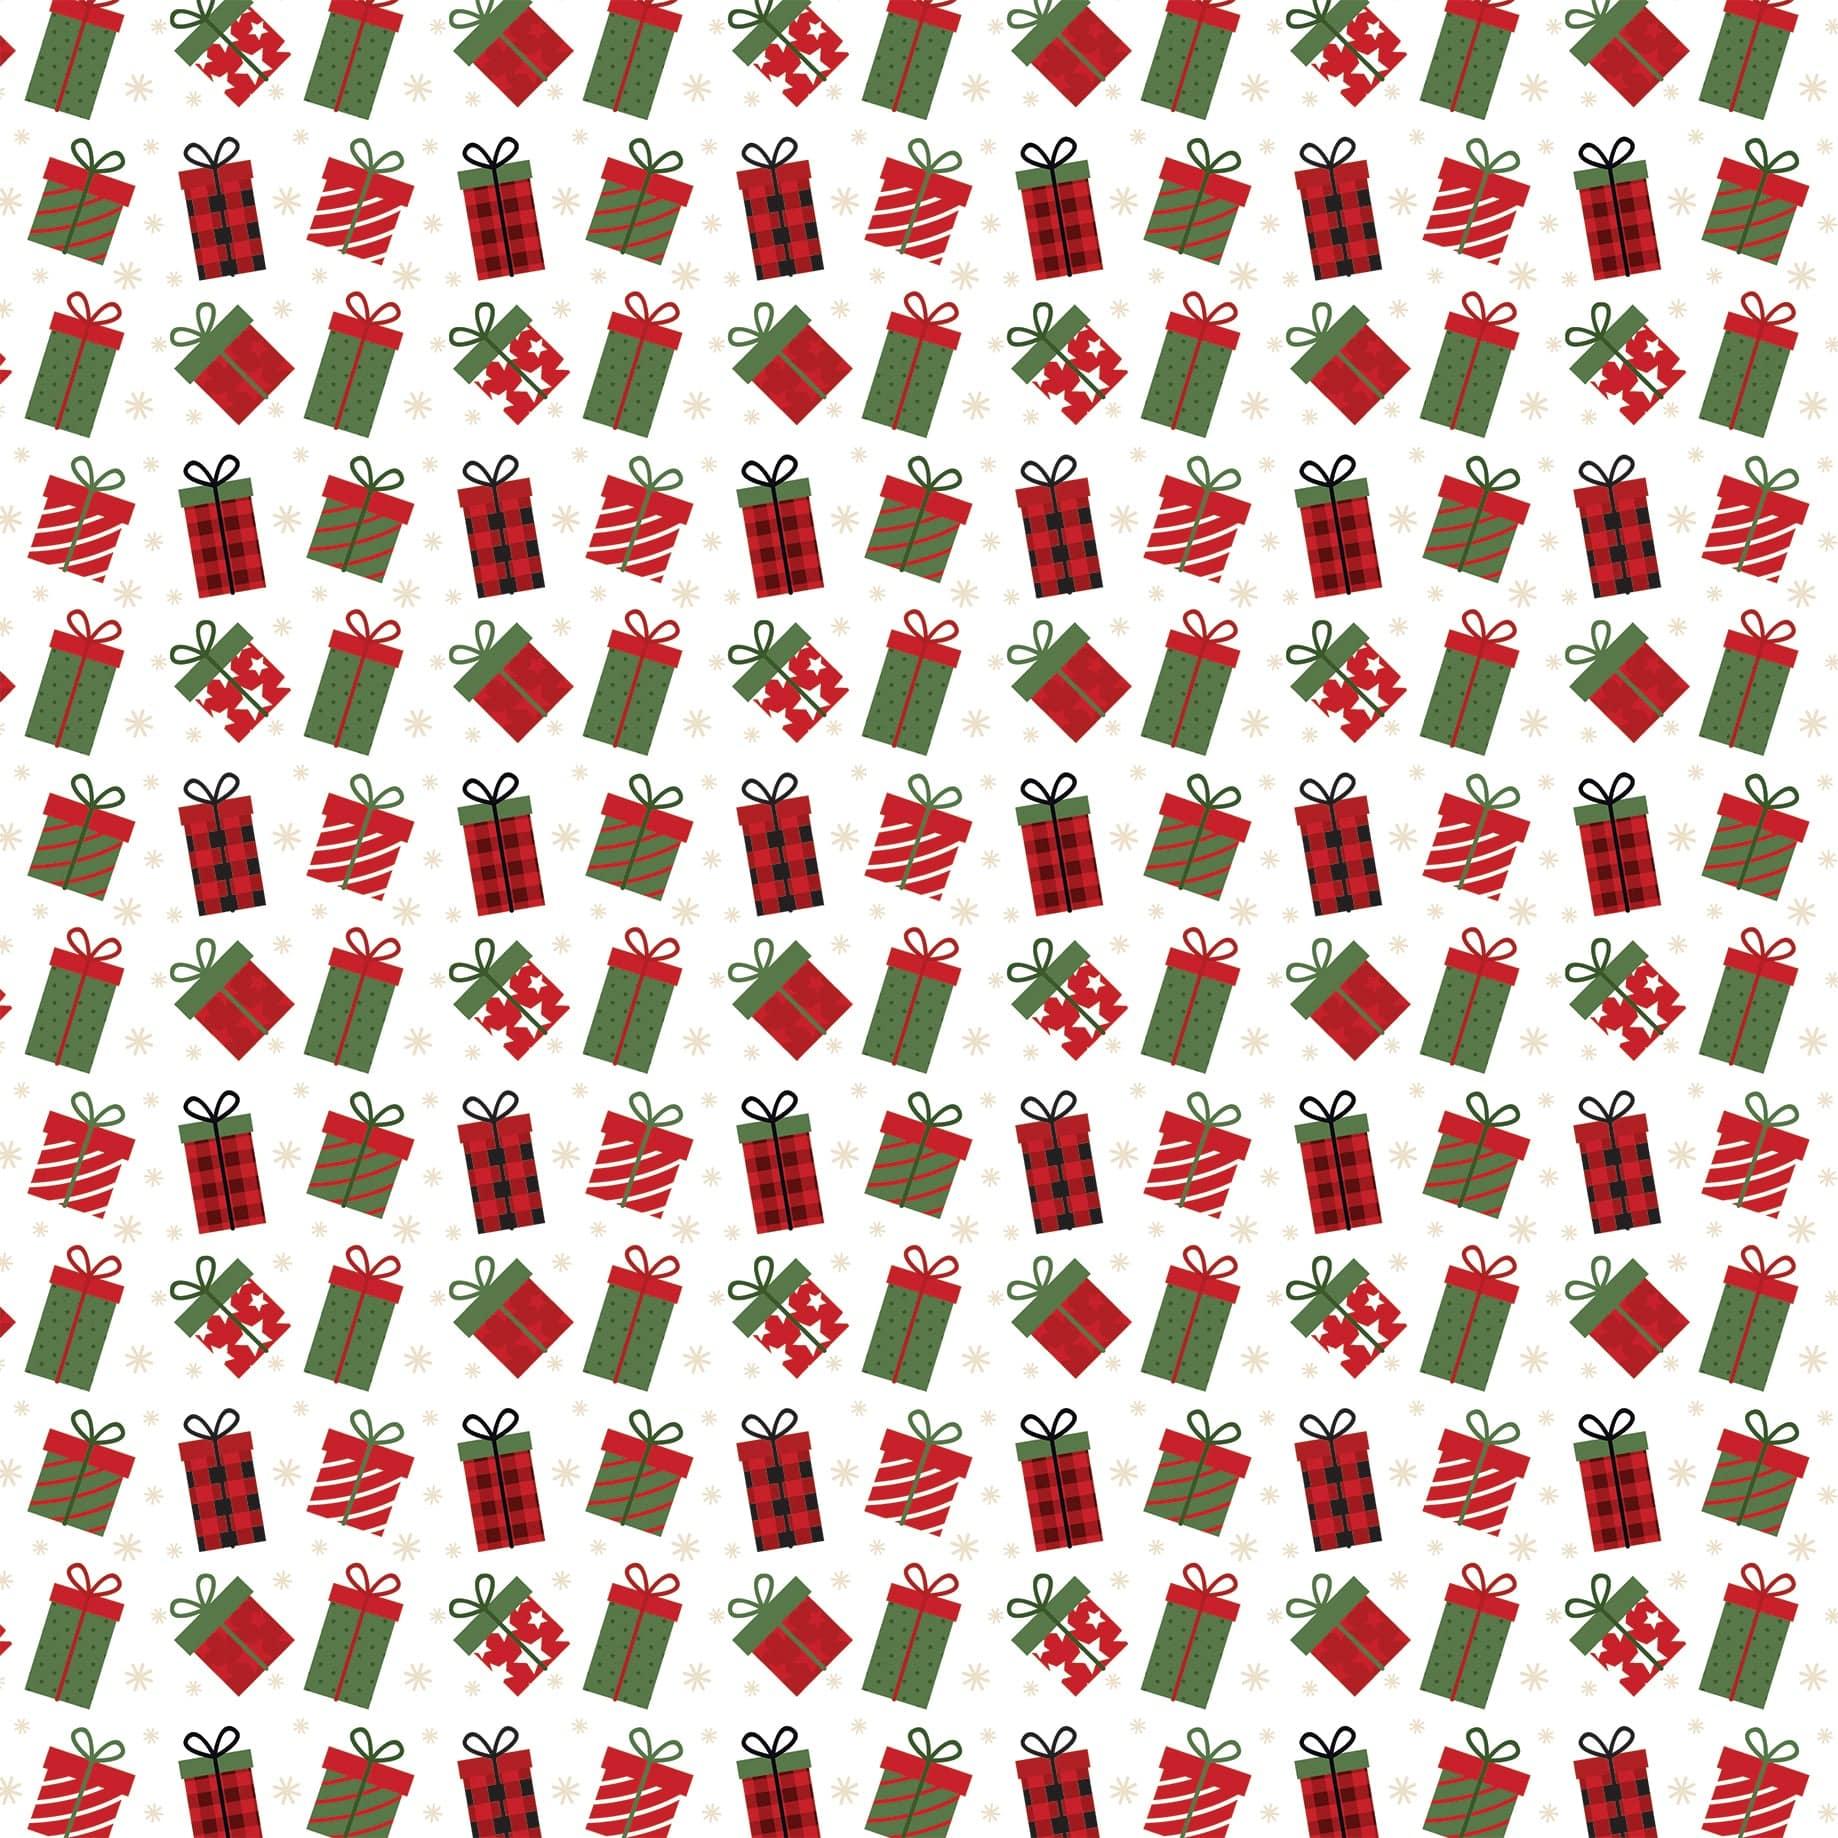 The Magic of Christmas Collection Giving Gifts 12 x 12 Double-Sided Scrapbook Paper by Echo Park Paper - Scrapbook Supply Companies